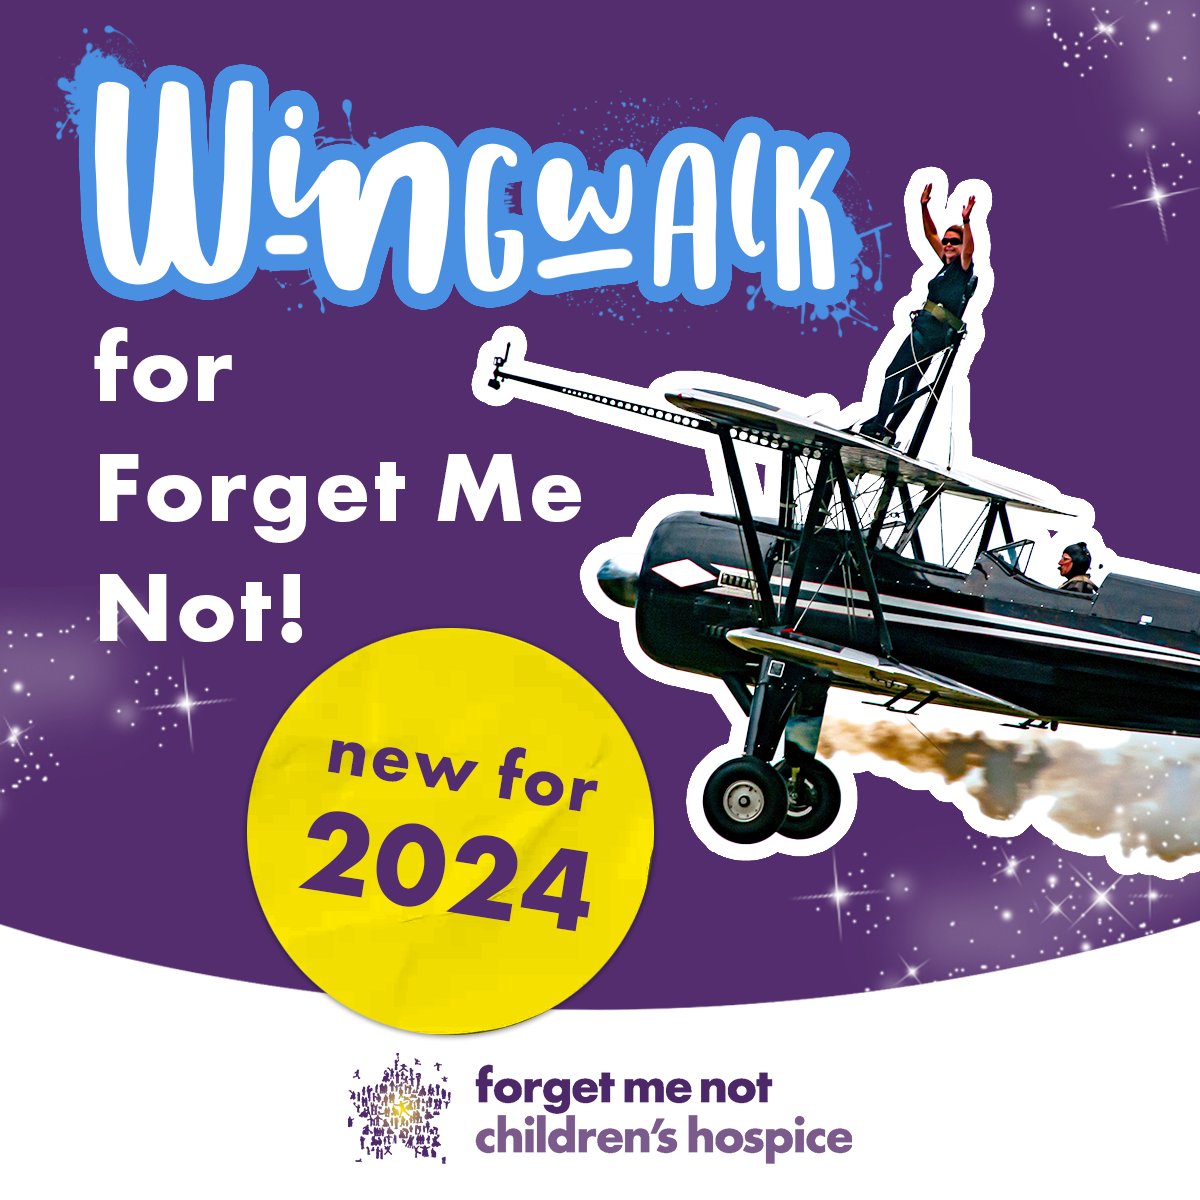 Looking for a white knuckle challenge? How about performing a wingwalk for Forget Me Not? 🛫 If you’re interested in signing up, get in touch with our events team at events@forgetmenotchild.co.uk